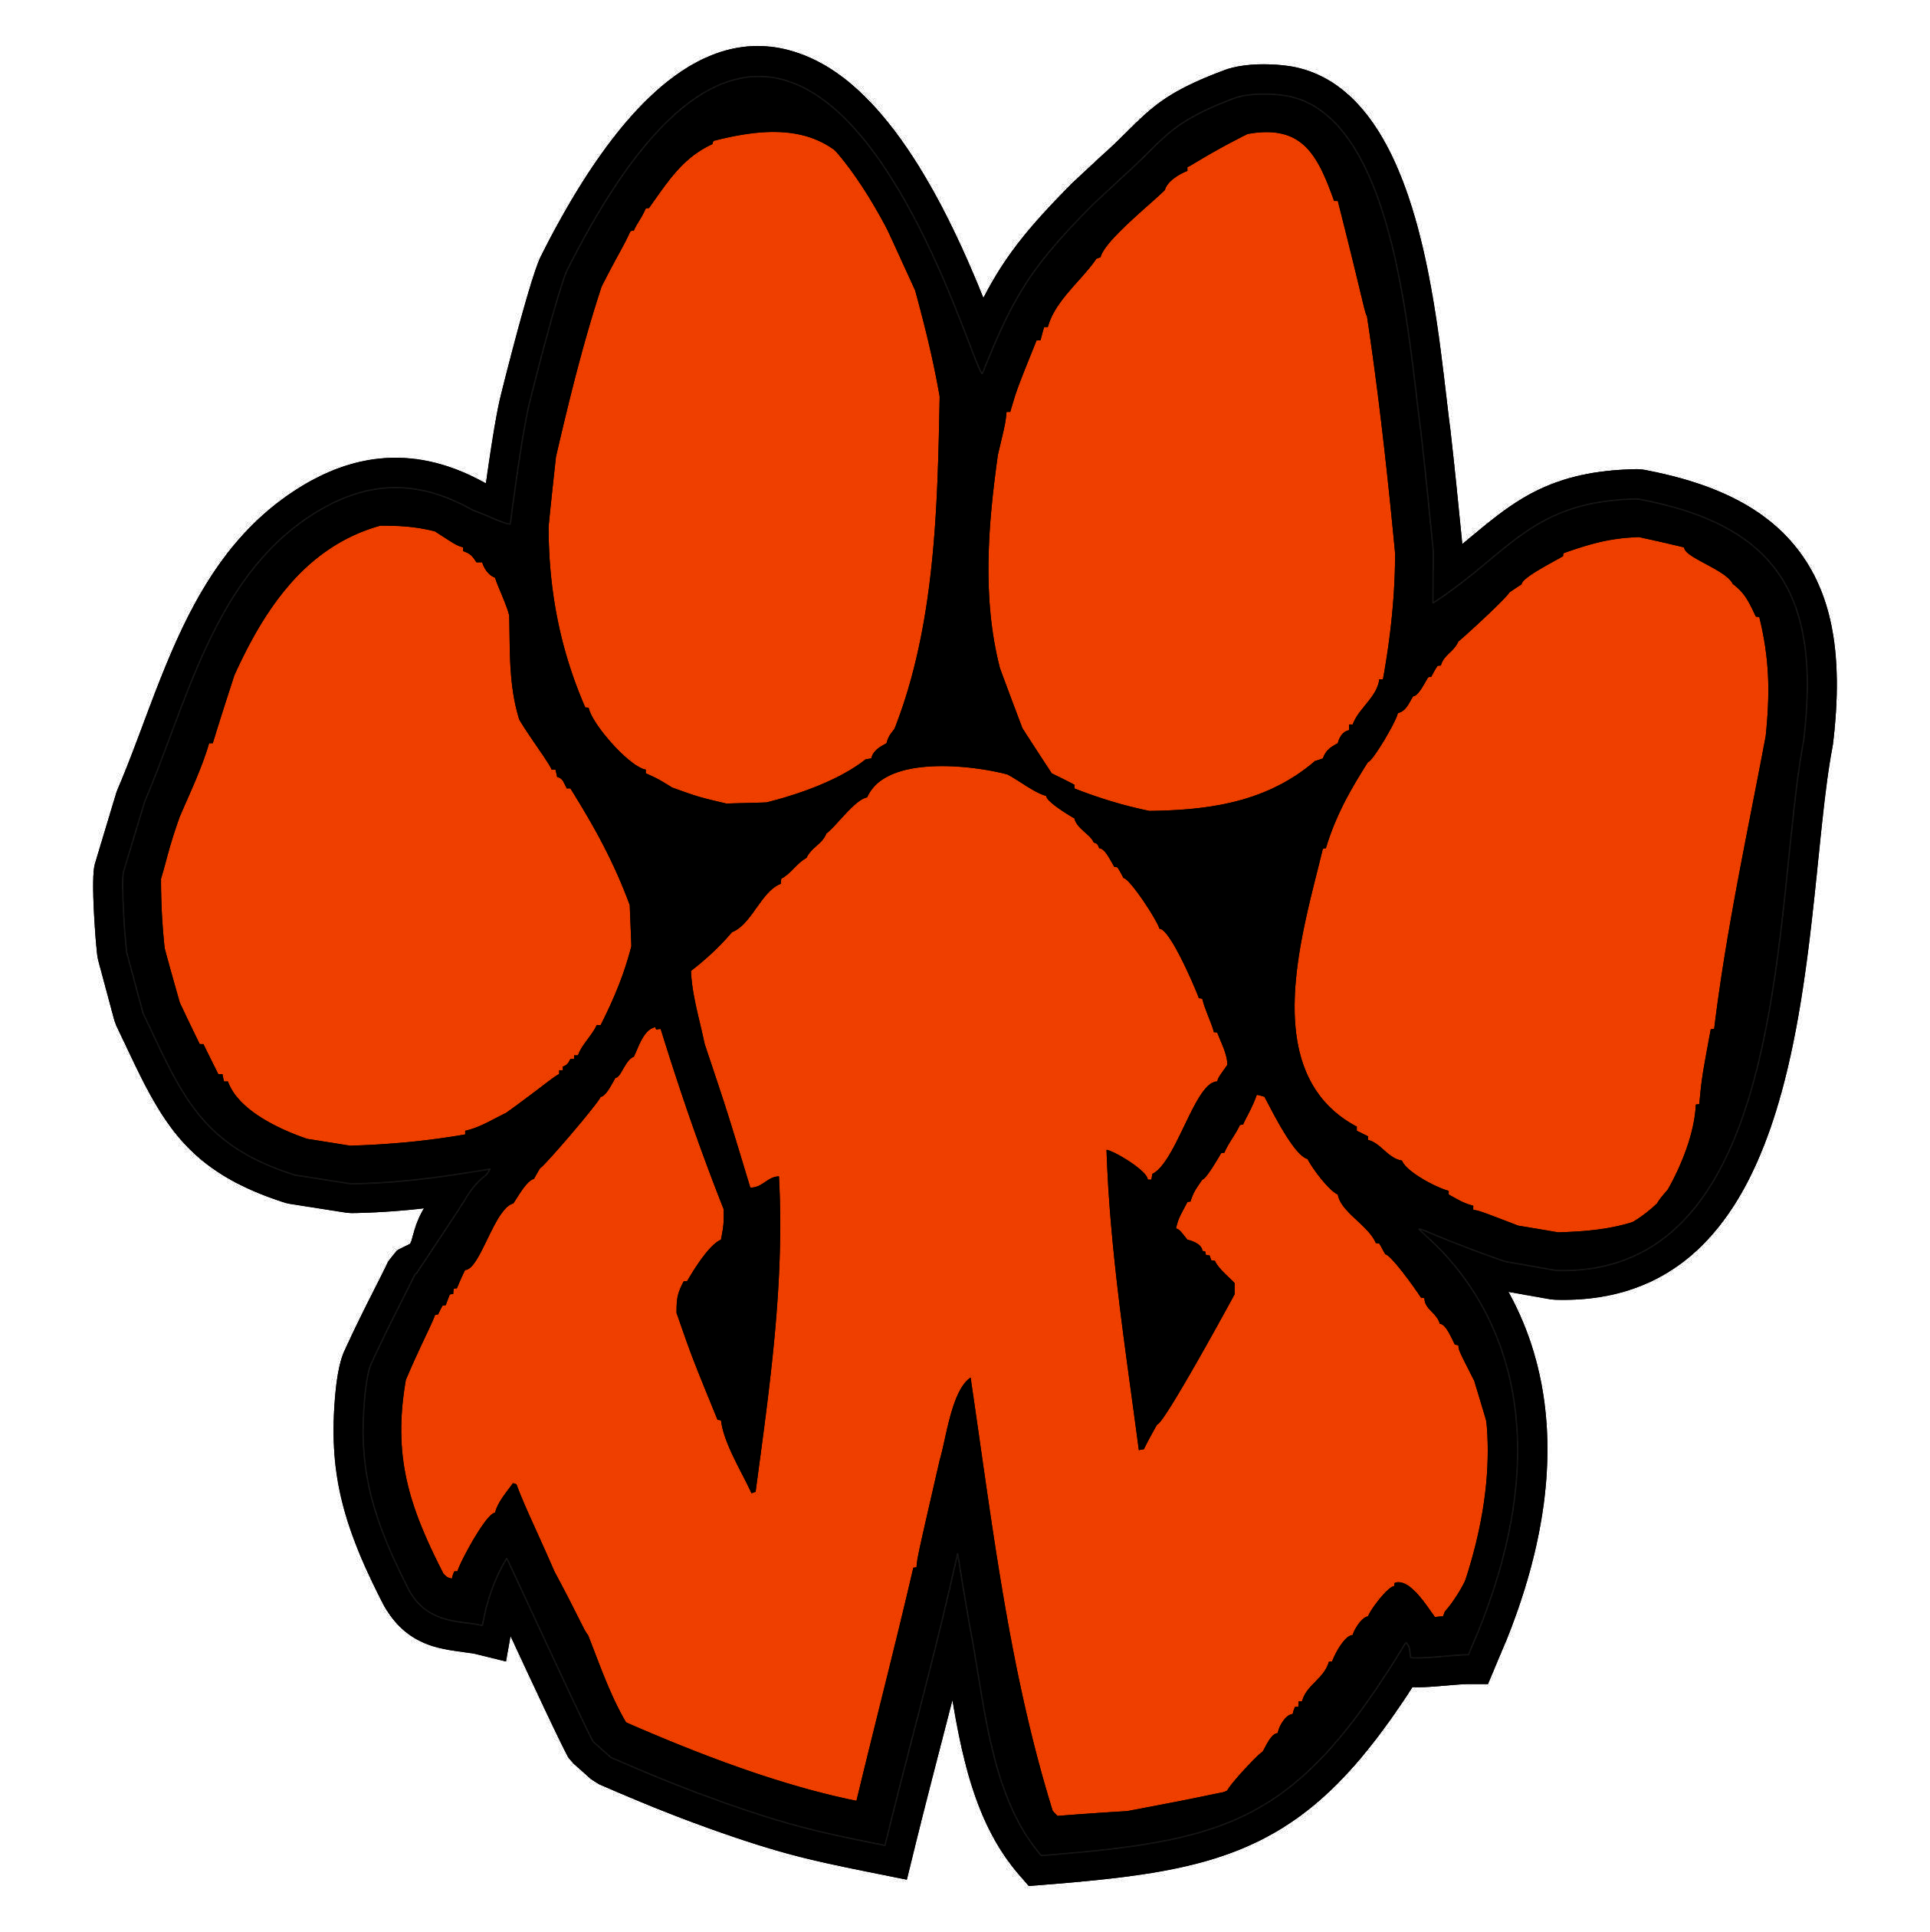 Wellsville Logo - Wellsville Tigers Paw vinyl decal print cut and laminated